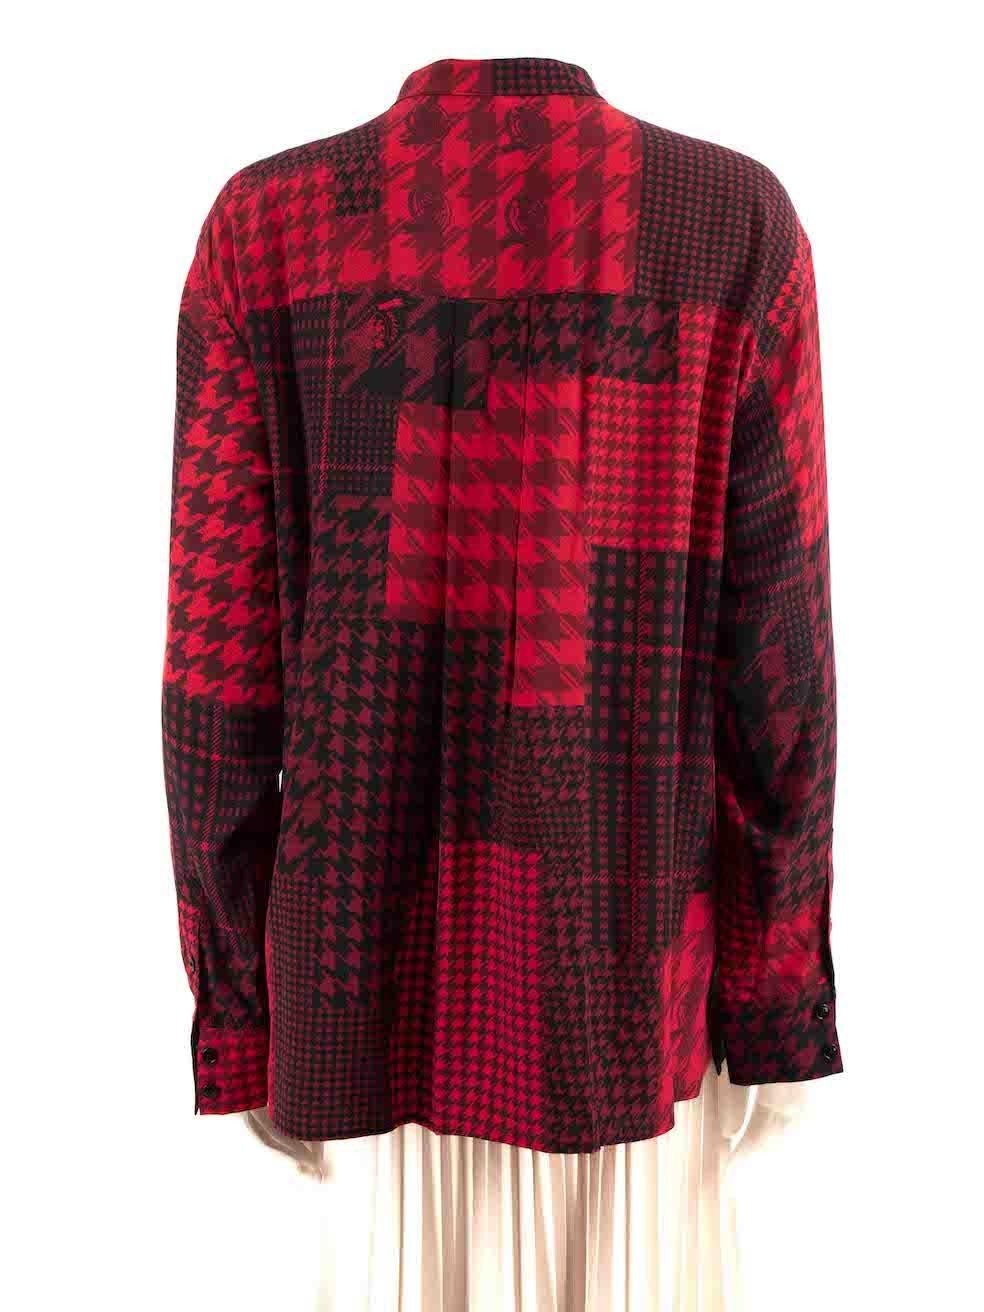 Tommy Hilfiger Red Houndstooth Print Shirt Size L In Good Condition For Sale In London, GB